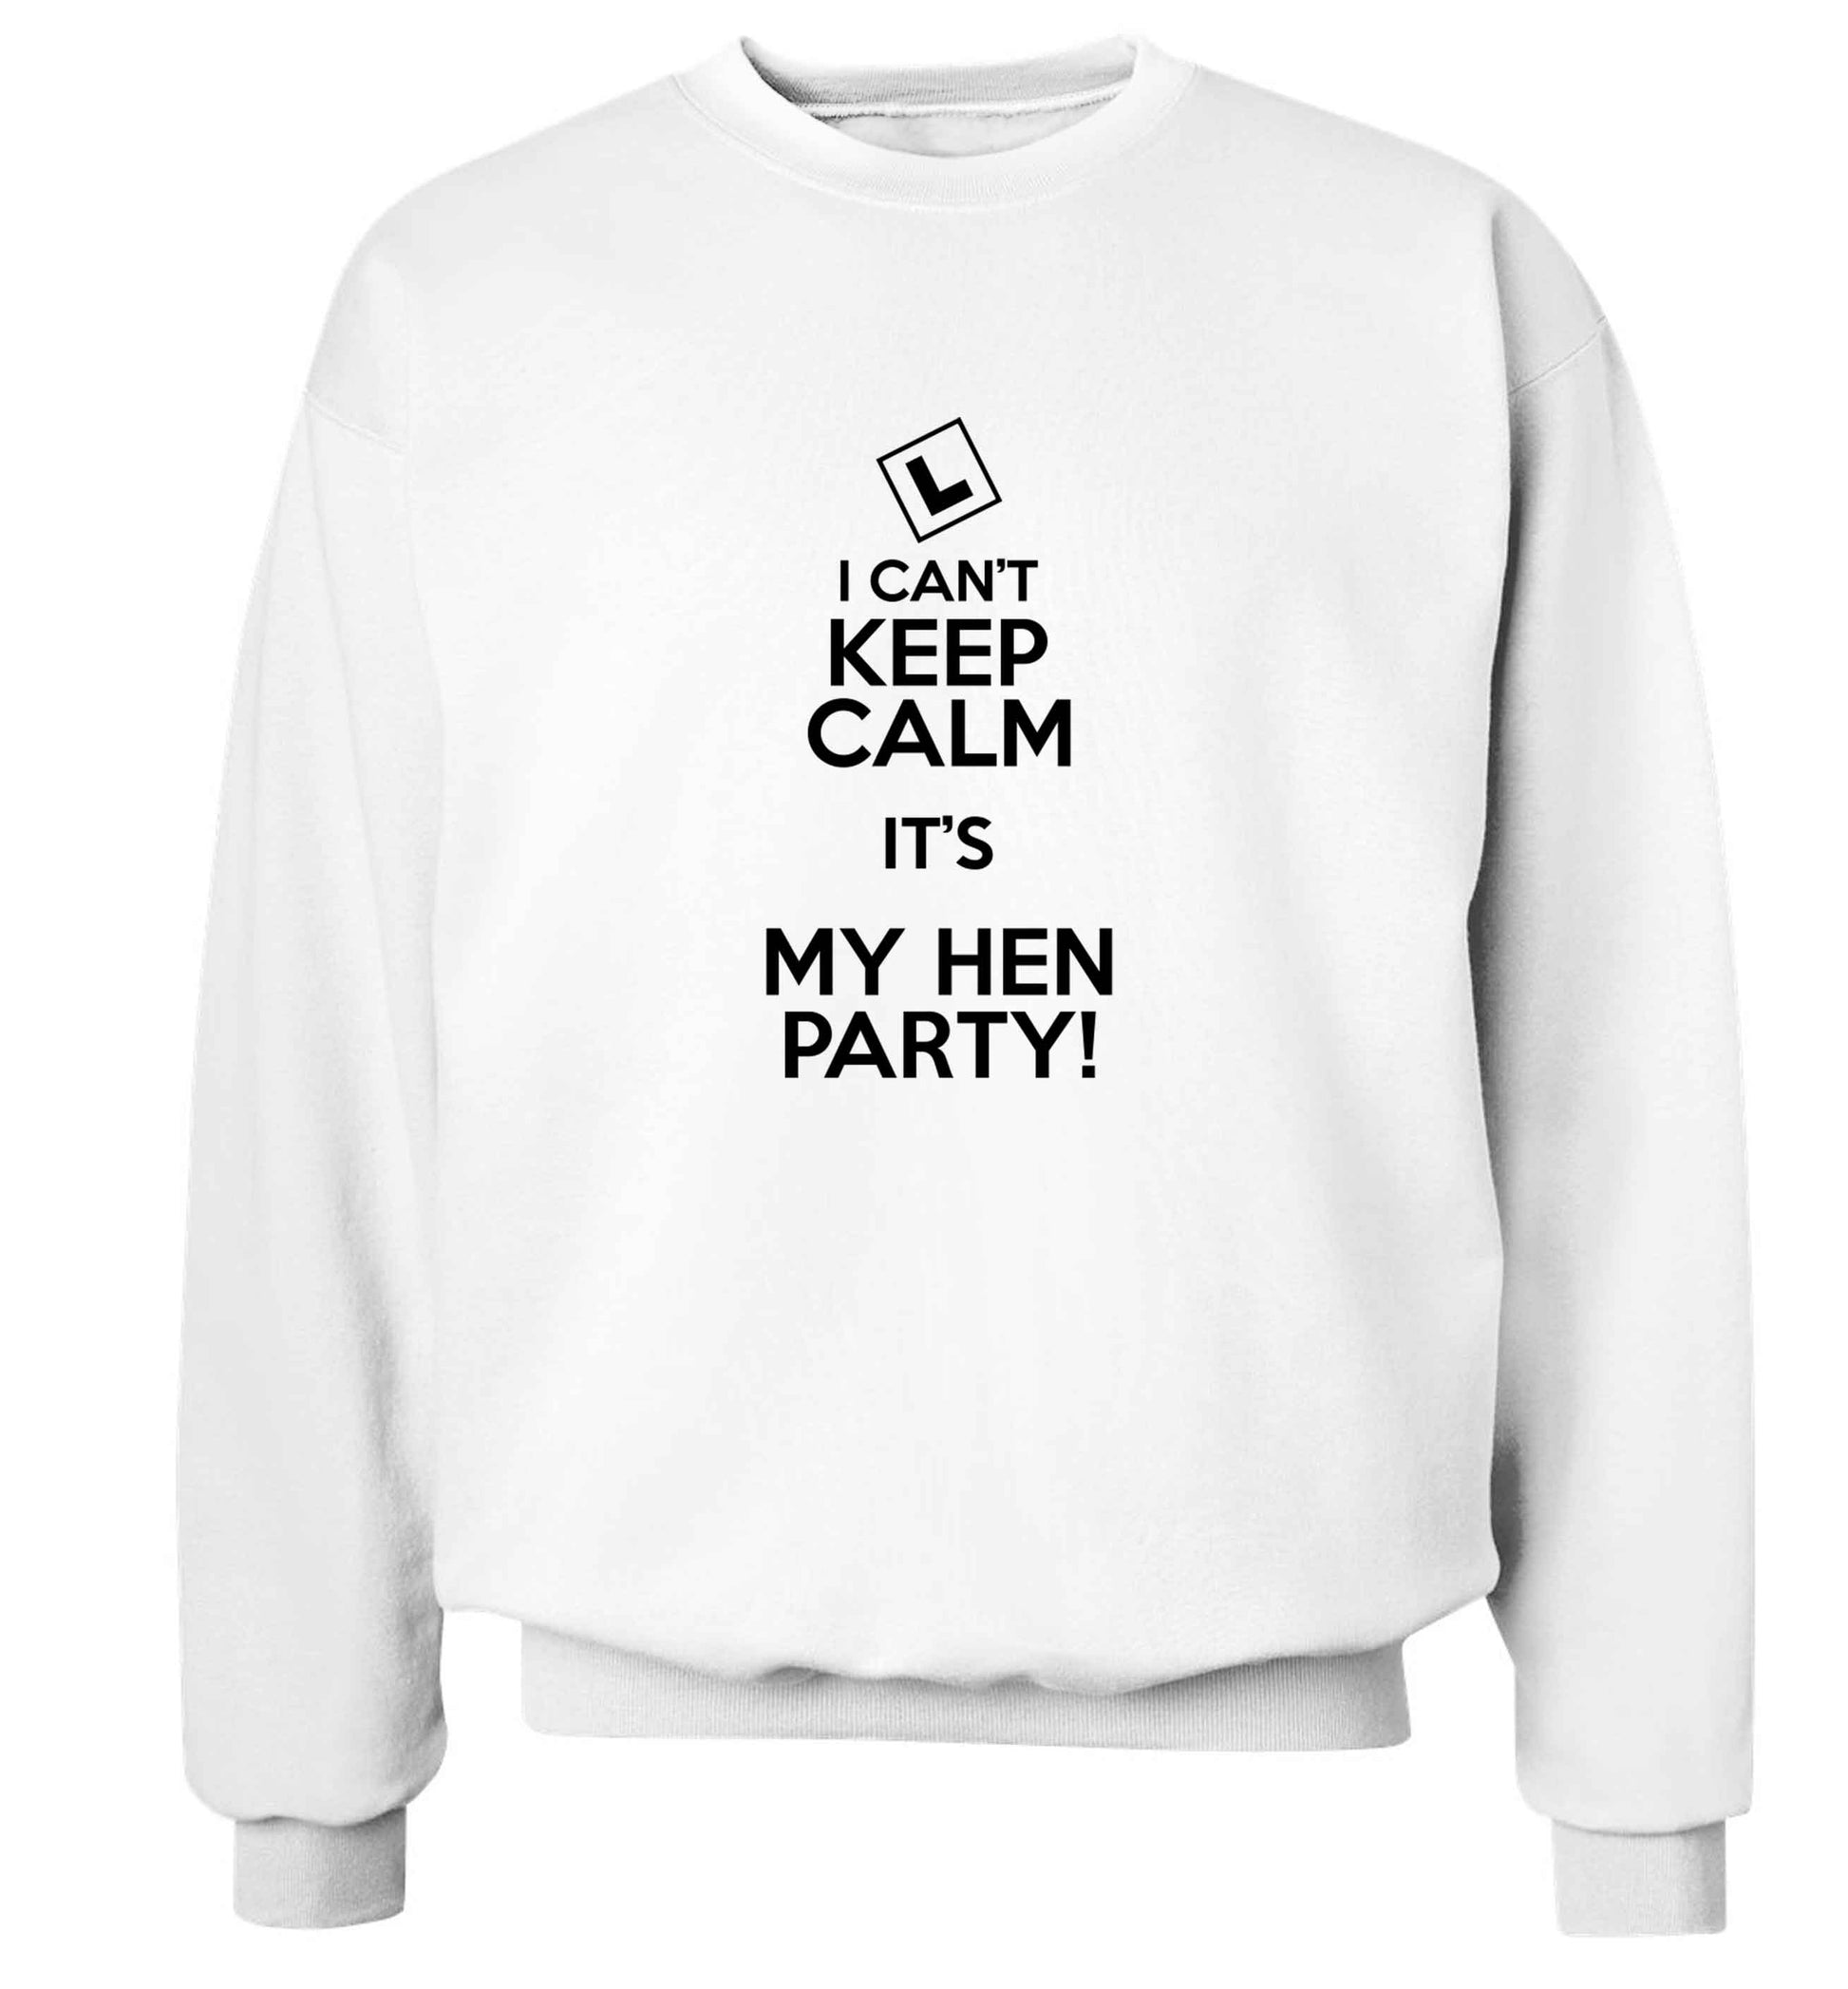 I can't keep calm it's my hen party adult's unisex white sweater 2XL